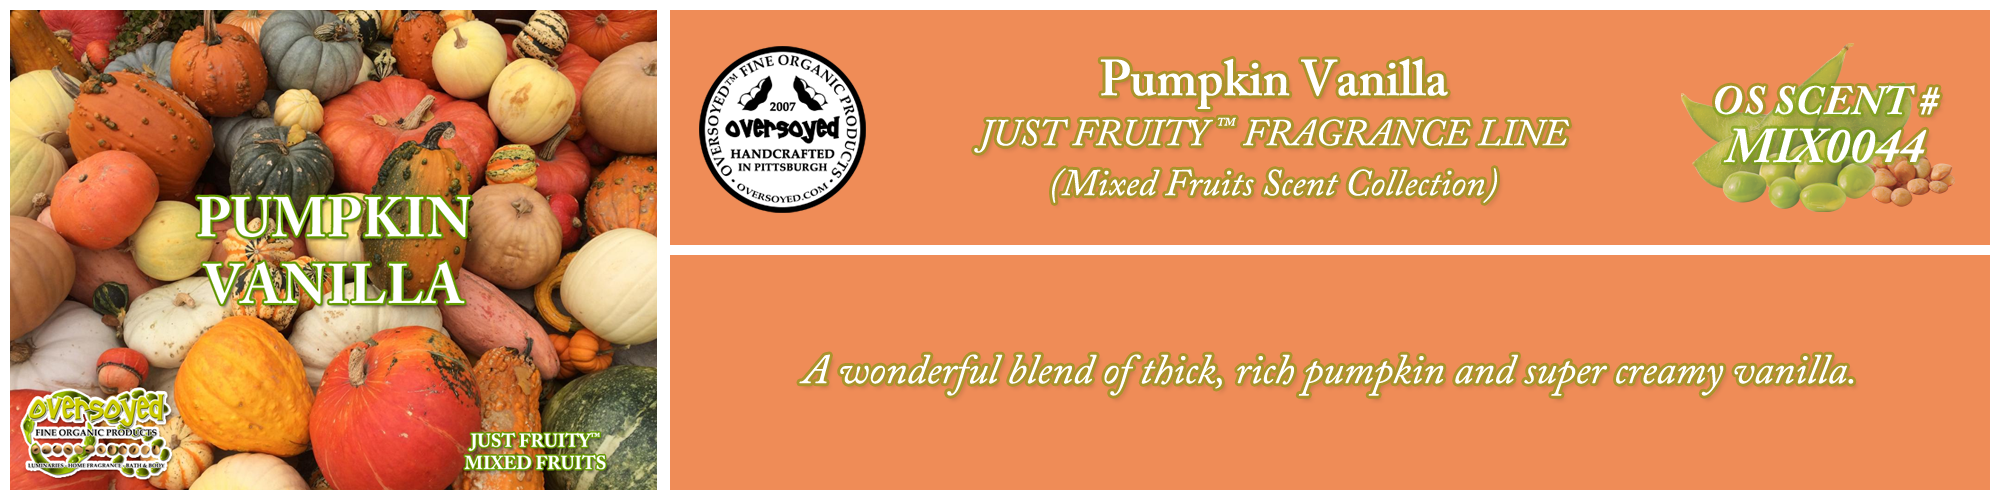 Pumpkin Vanilla Handcrafted Products Collection